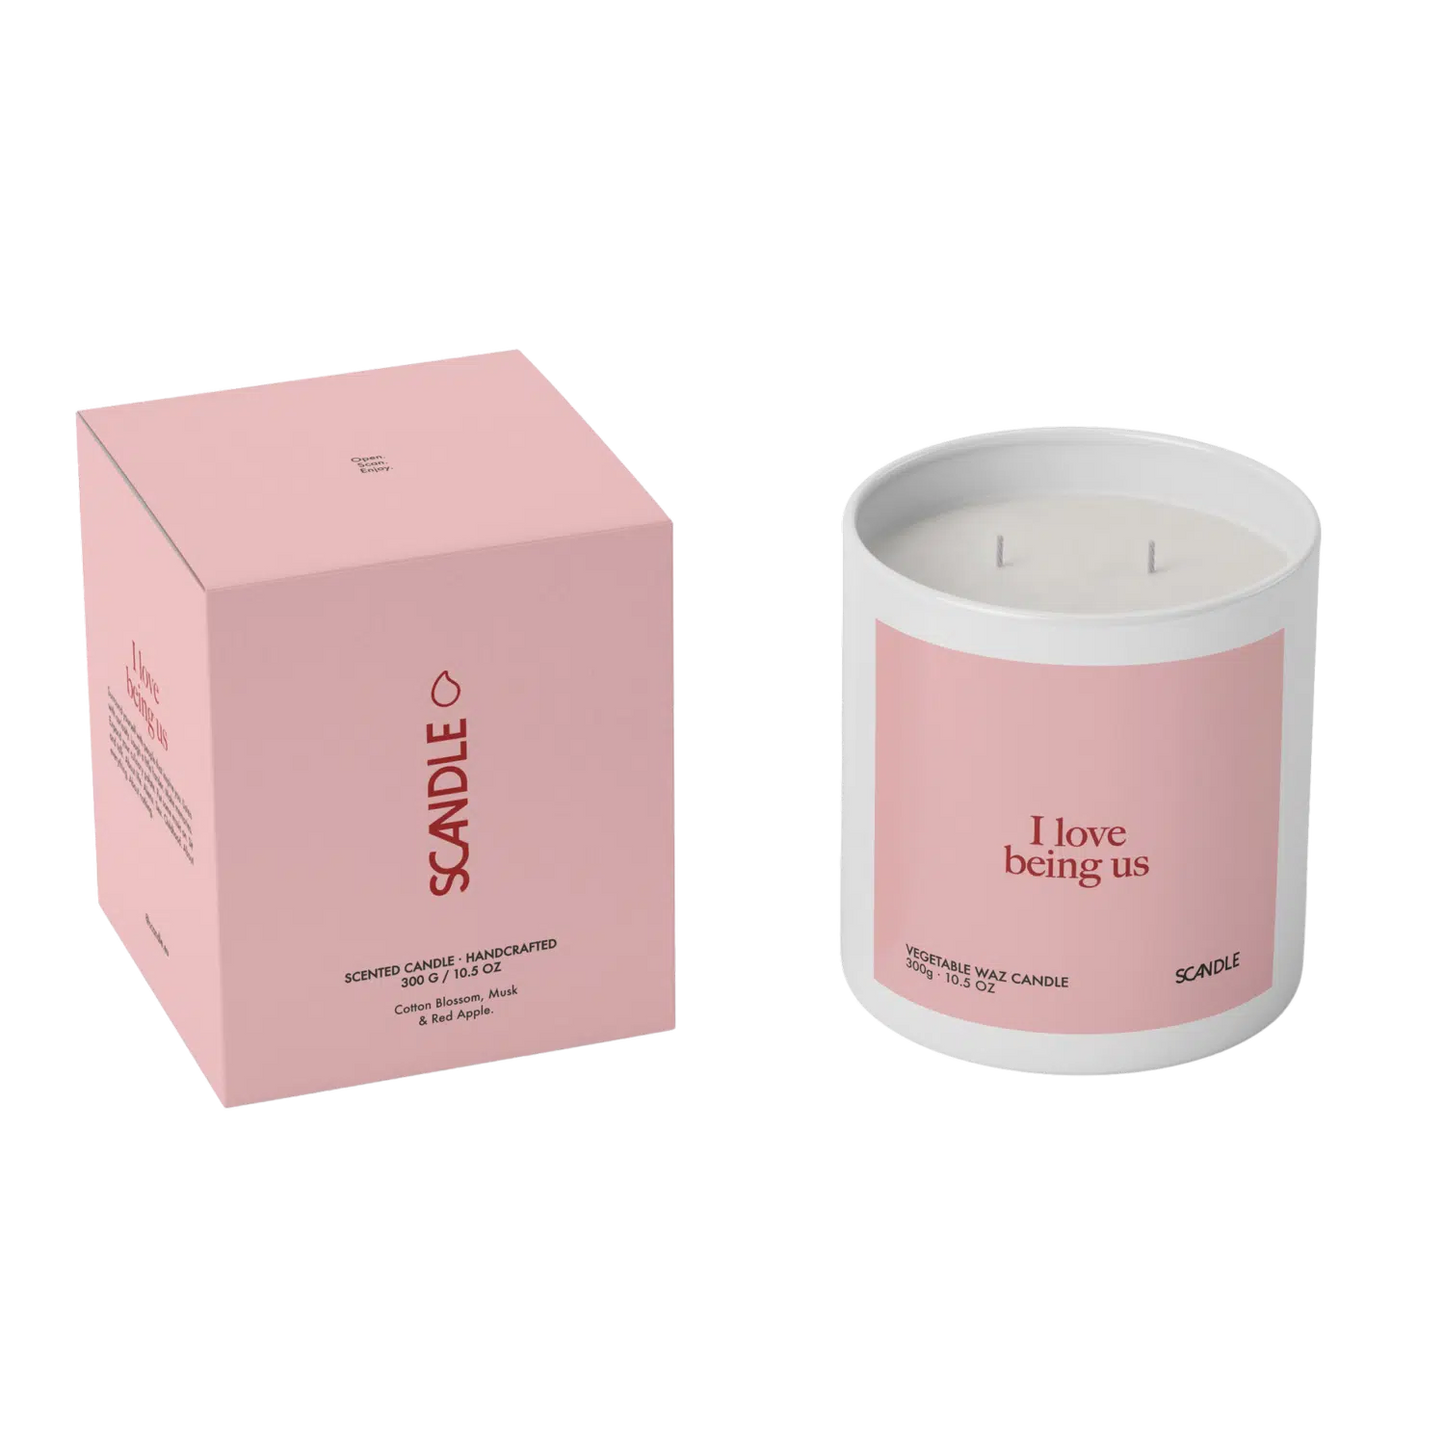 Scandle 'Being Us' Scented Candle 300gr